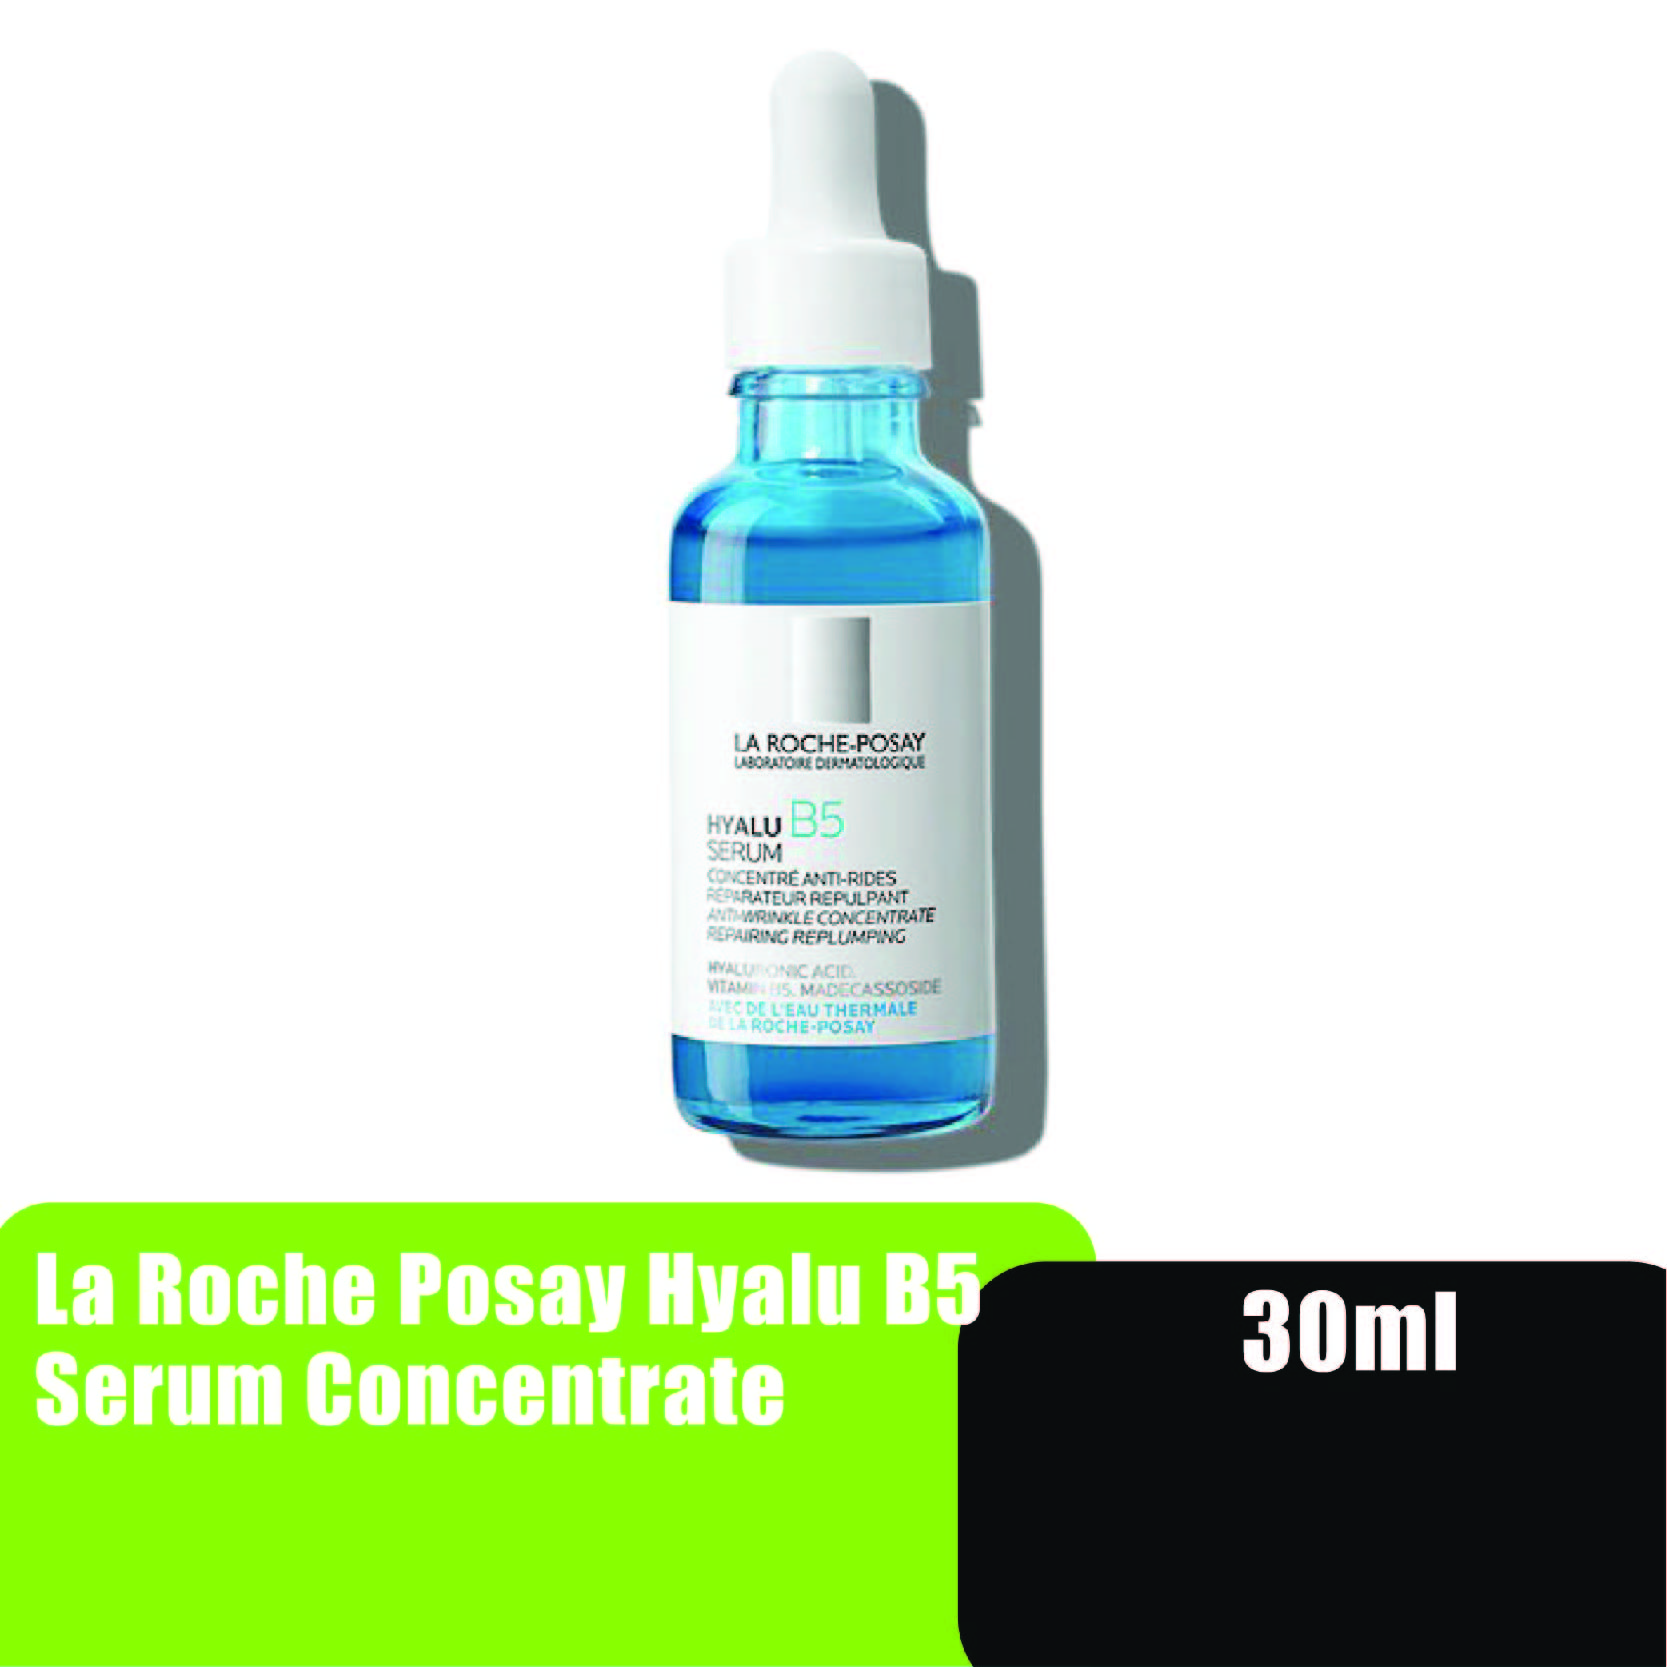 LA ROCHE POSAY Hyalu B5 Serum Anti-Wrinkle Concentrate 30ml - Anti Anging Face Serum For Anti Wrinkle & Fine Lines 精华液